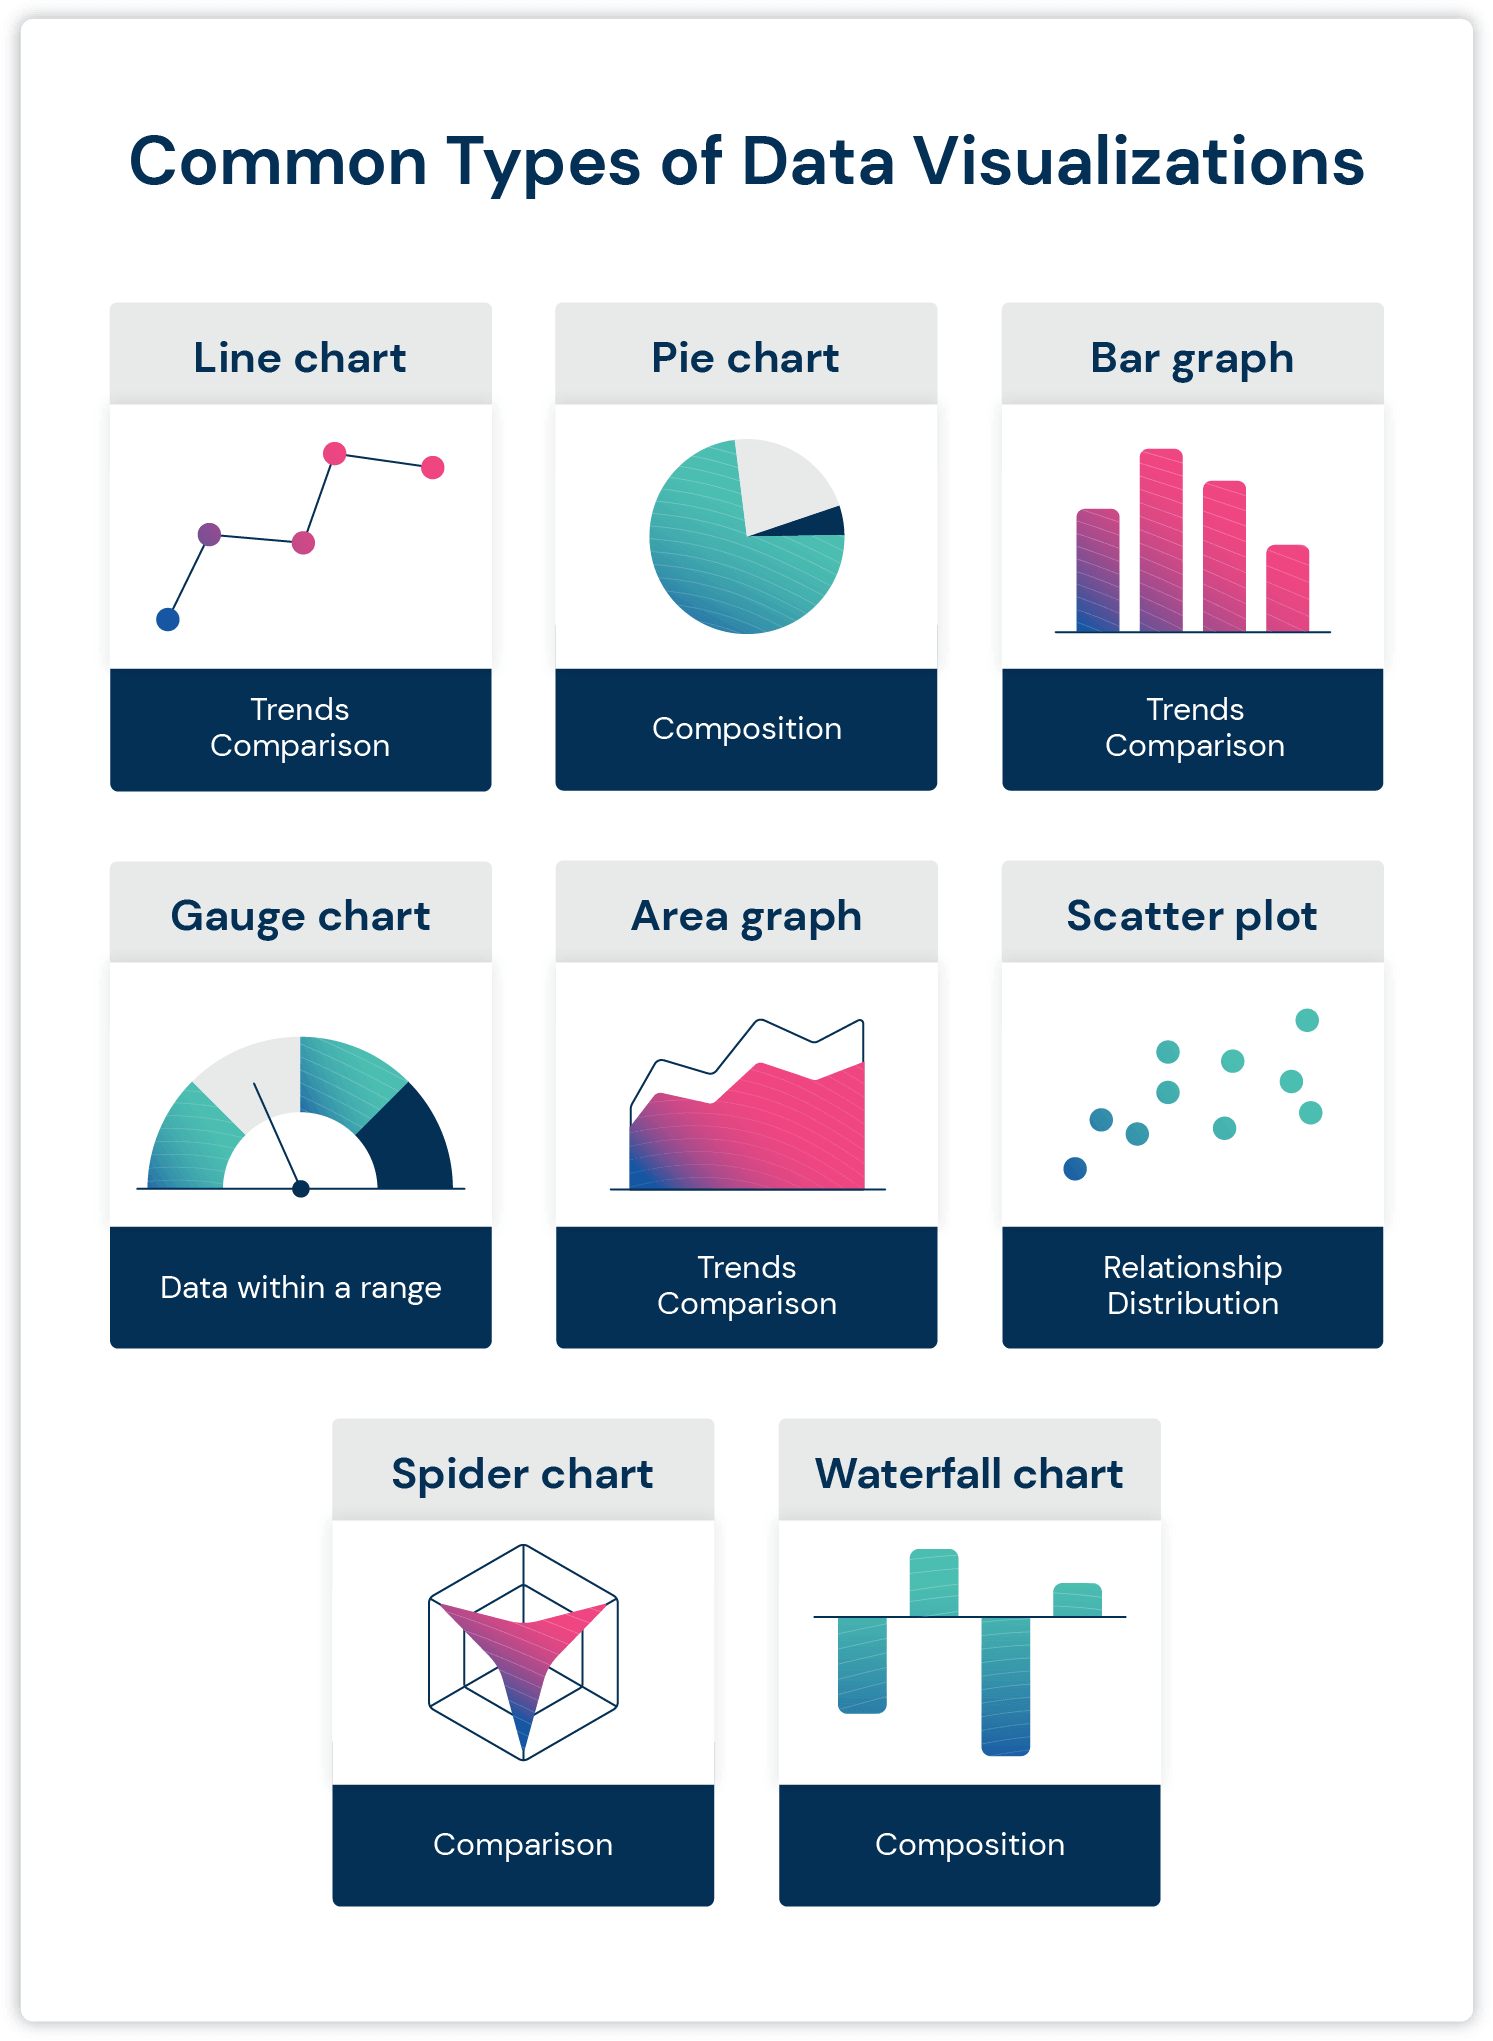 common data visualizations include line charts, pie charts, bar graphs, gauge charts, area graphs, scatter plots, spider charts, and waterfall charts